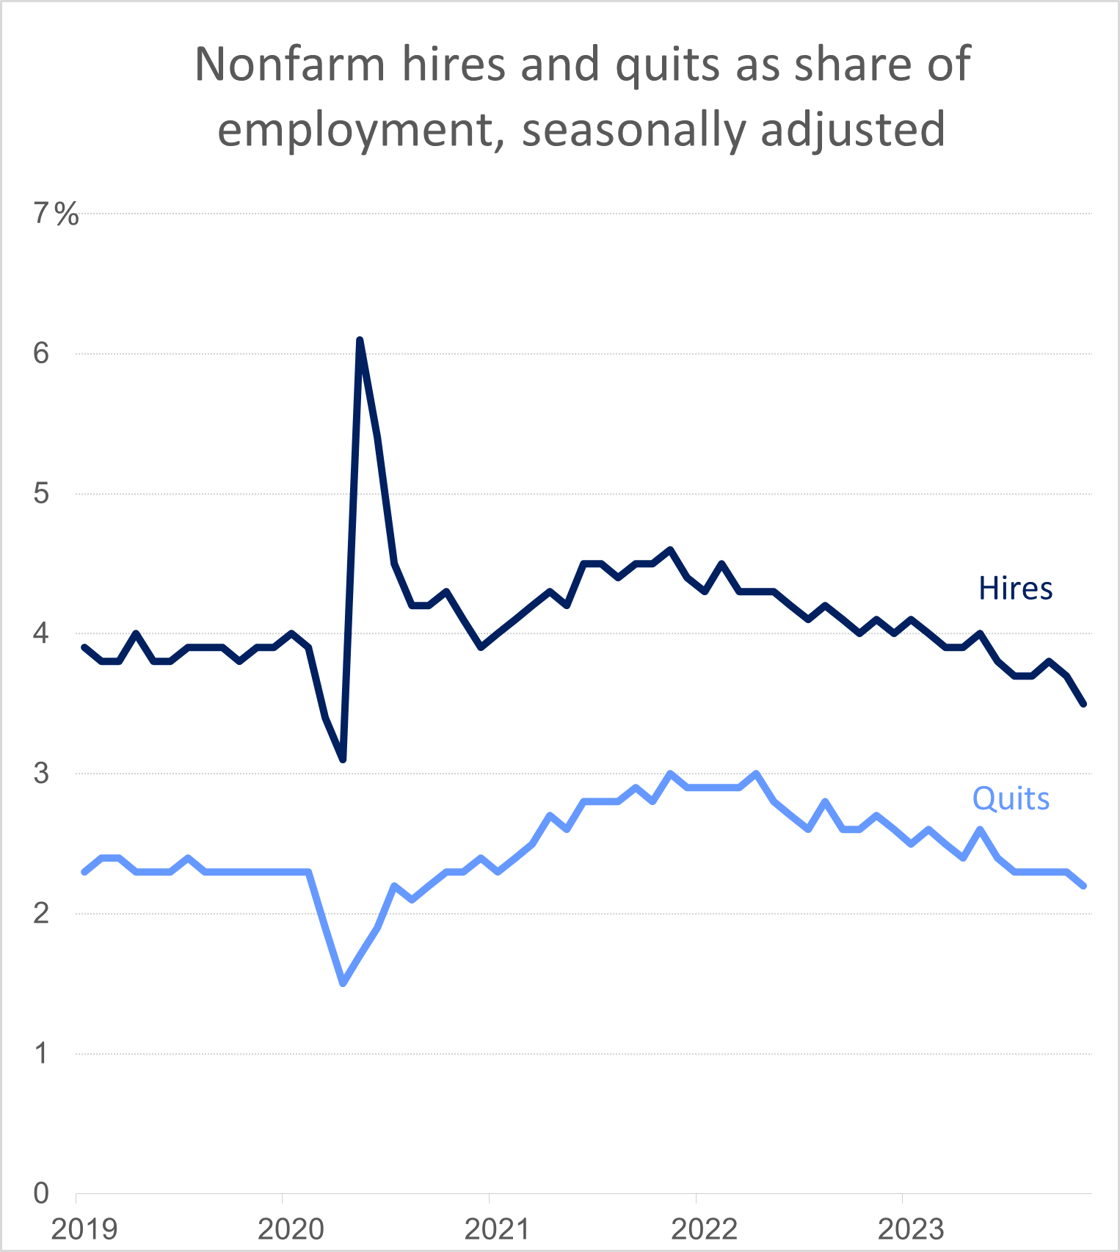 Monthly nonfarm hires and quits as a share of employment, seasonally adjusted, since January 2019. Hires start at roughly 4%, abruptly falling then rising during the pandemic, reaching a local peak of near 4.5% in early 2022 and falling to their most recently measured level of 3.5% in November 2023. Quits follow a similar pattern, starting at roughly 2.3% prior to the pandemic, then briefly falling and rising during the beginning of the pandemic, reaching a maximum of near 3% in early 2022, and falling down to their most recently measured level of 2.2% in November 2023.